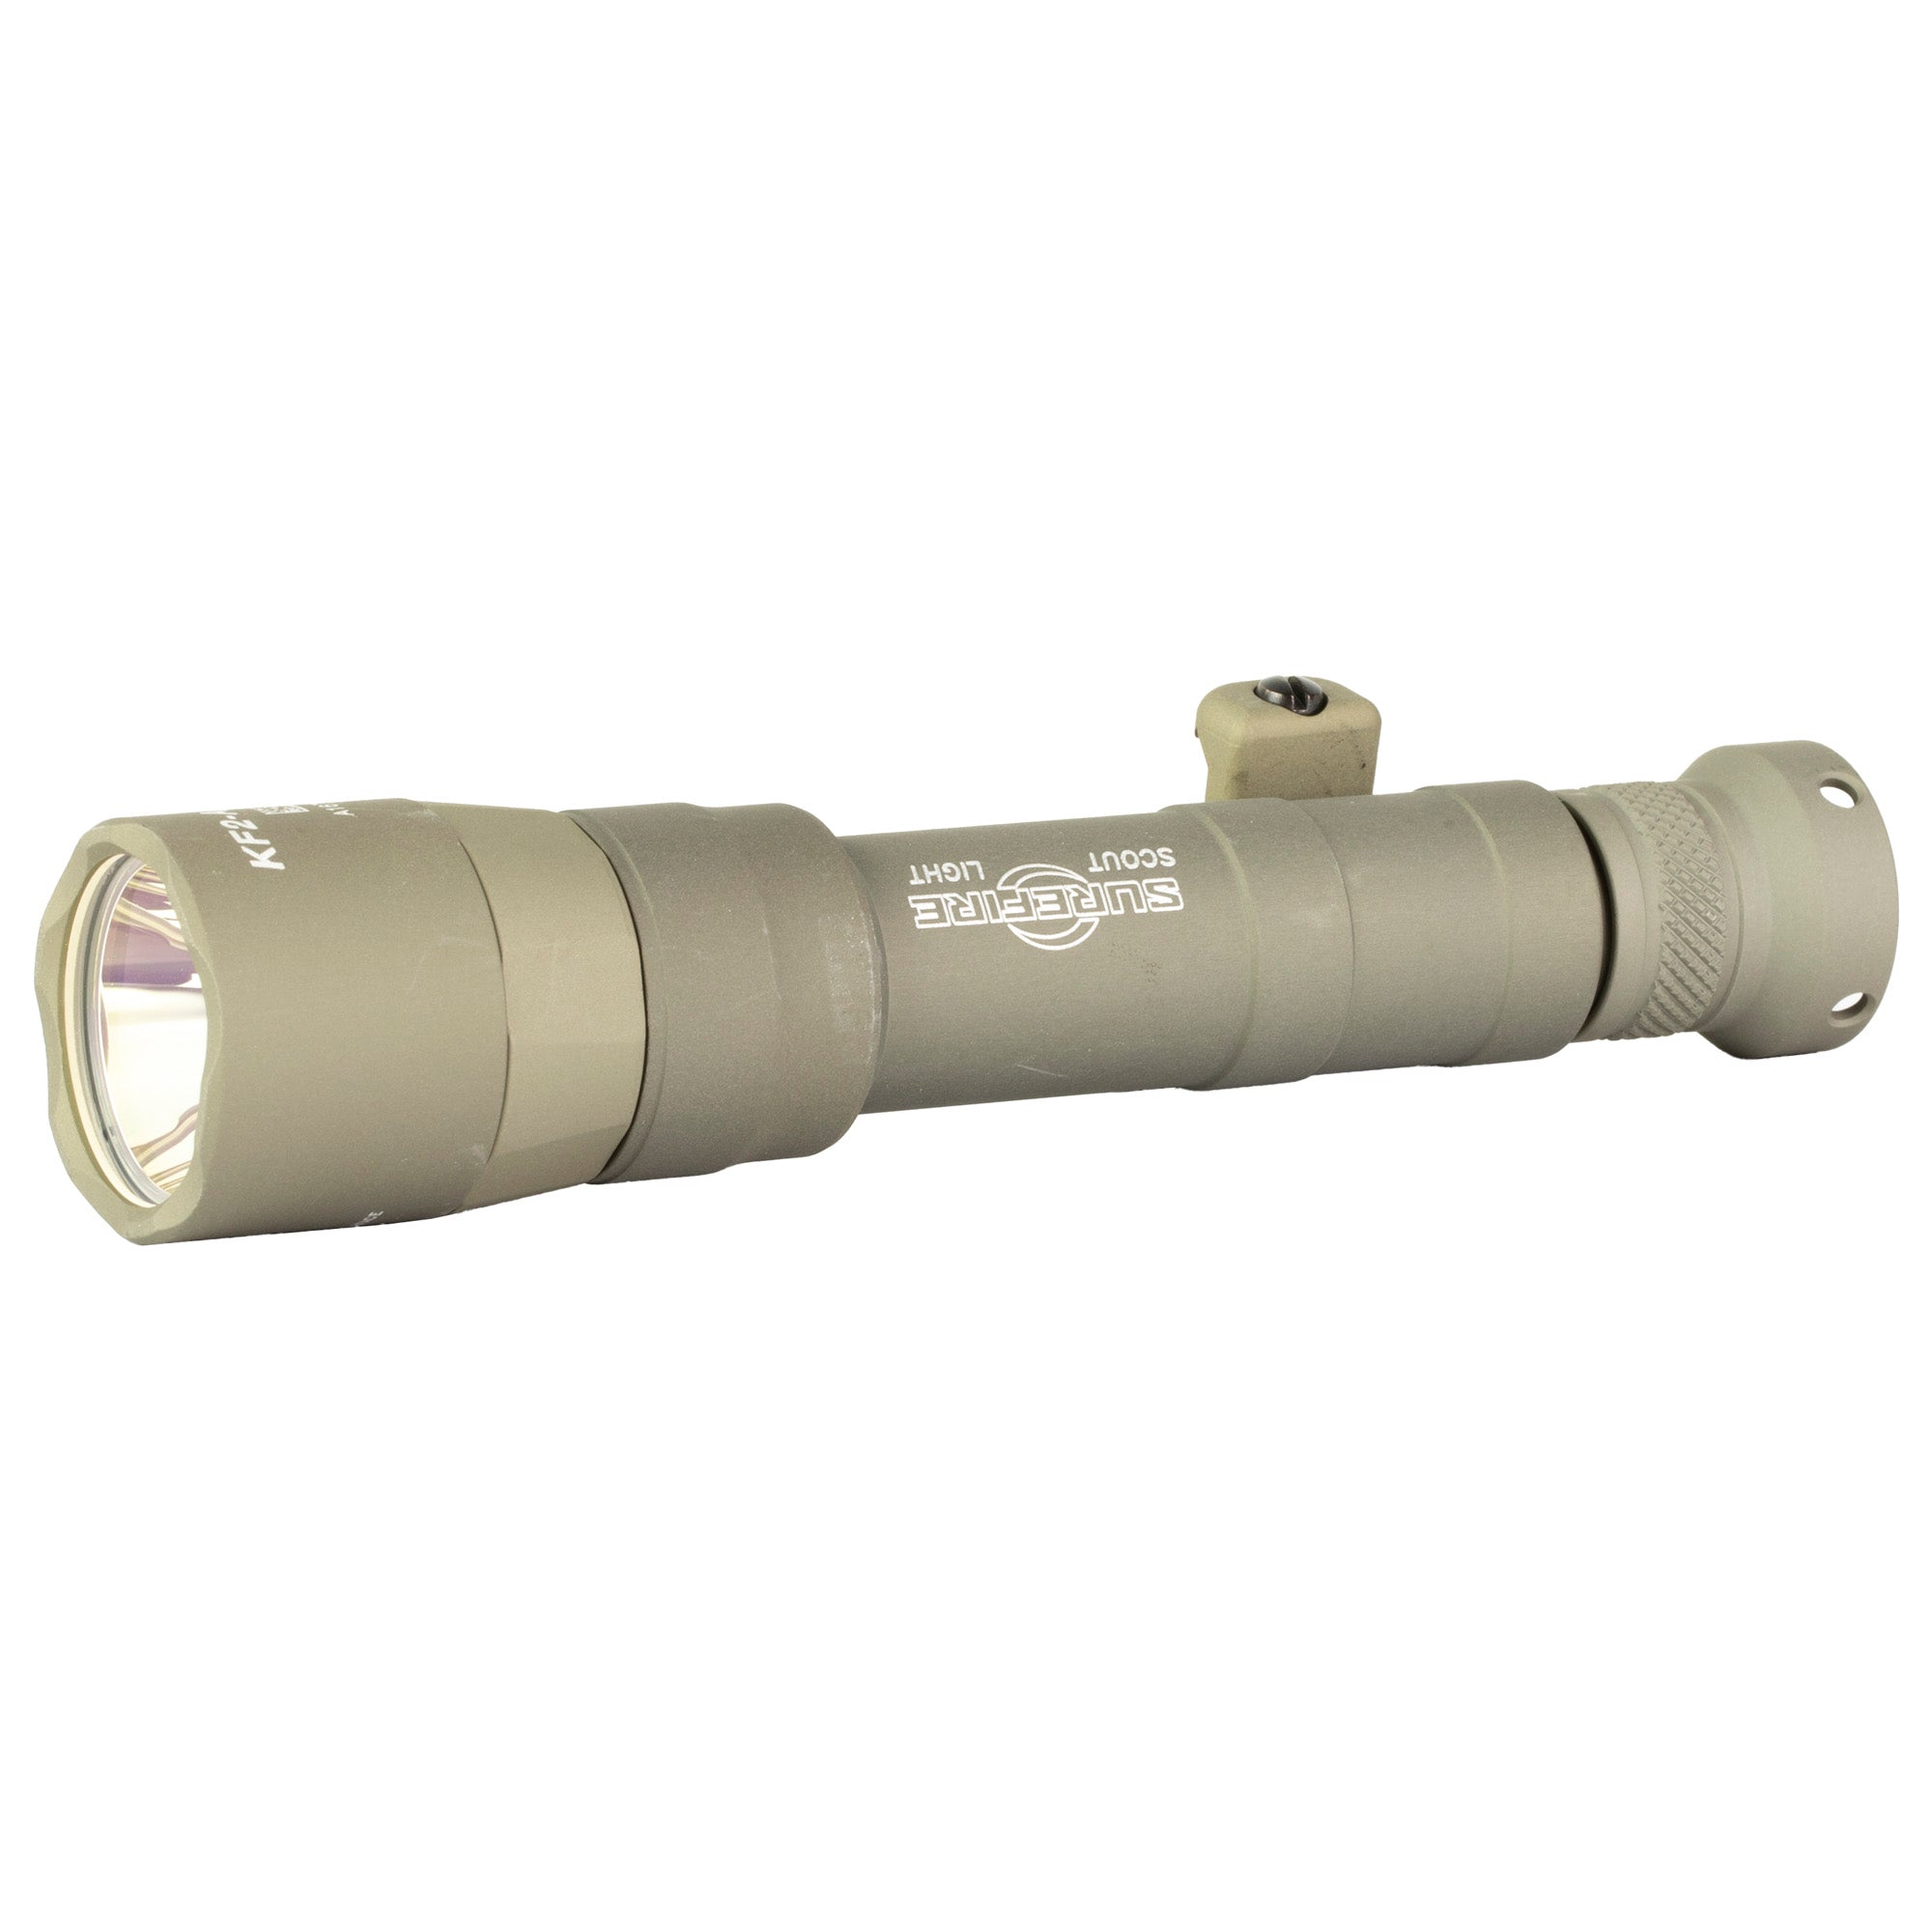 Surefire M640DFT Turbo Scout Light Pro in tan, featuring 1000 lumens and dual fuel technology, mounted with an MLOK adapter, and includes a 18650 rechargeable battery.